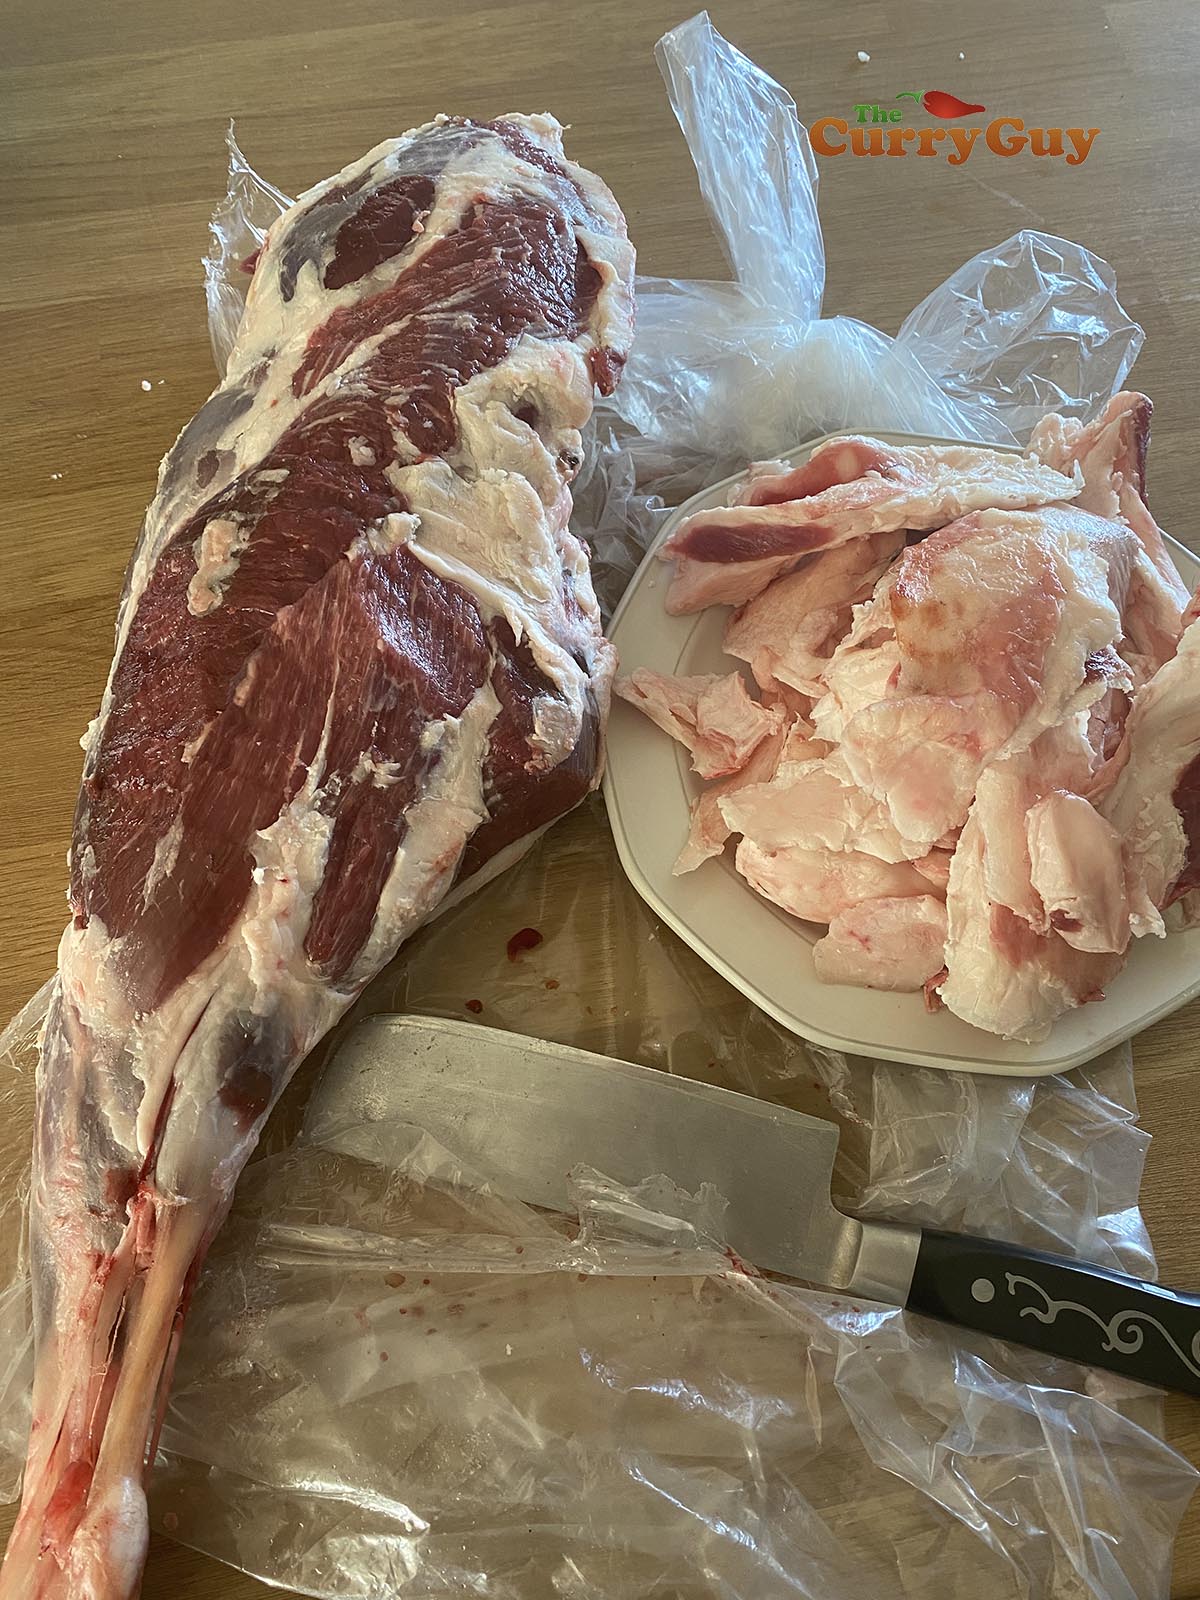 Let of lamb with fat trimmed off.